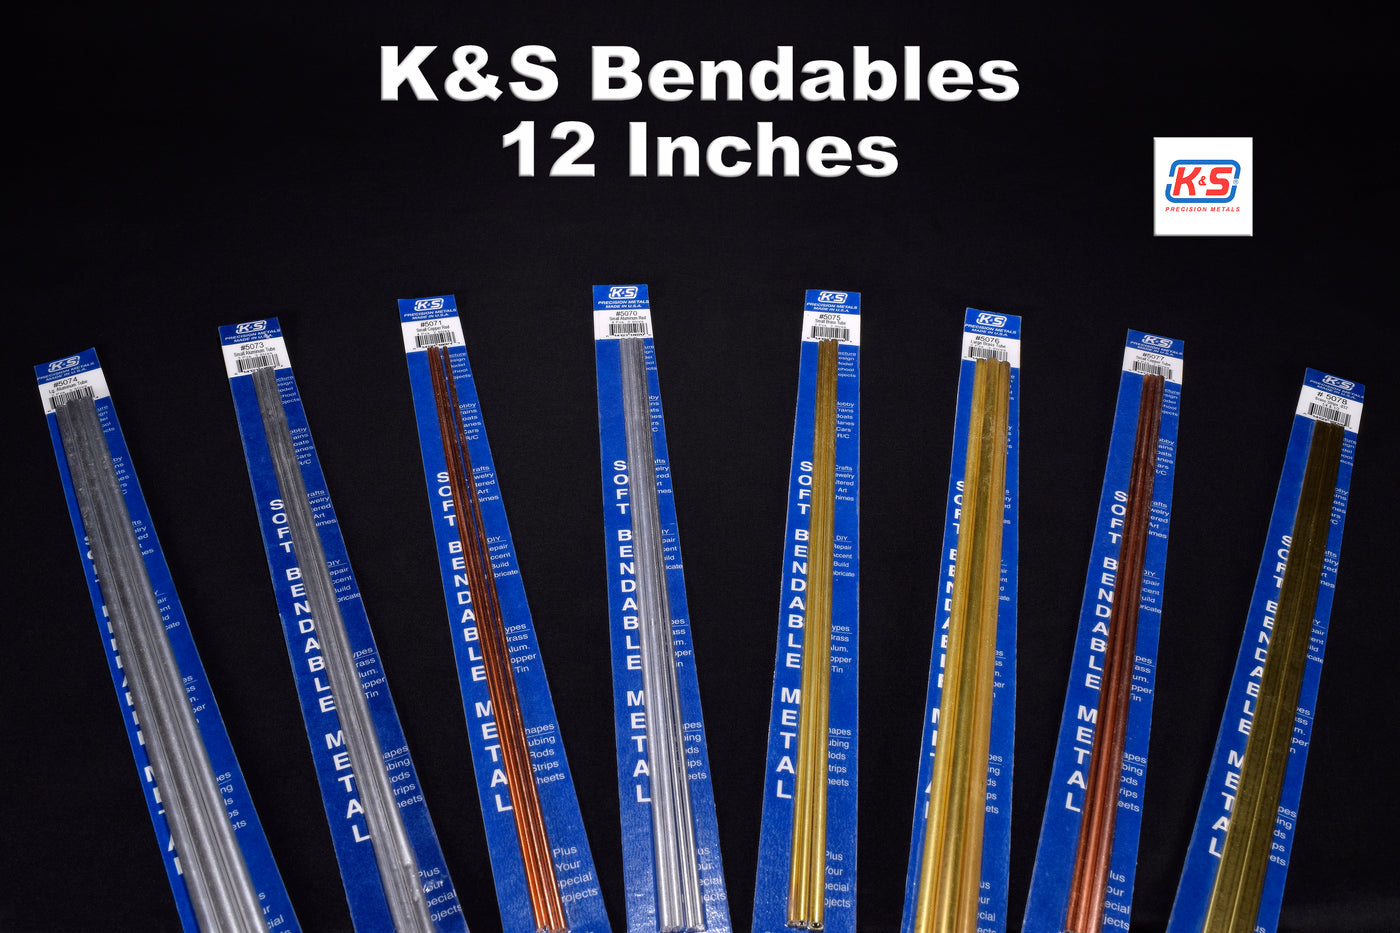 K&S Bendable Brass Strips .032 Thick, 1/4 and 1/2 wide, 2pcs. Each